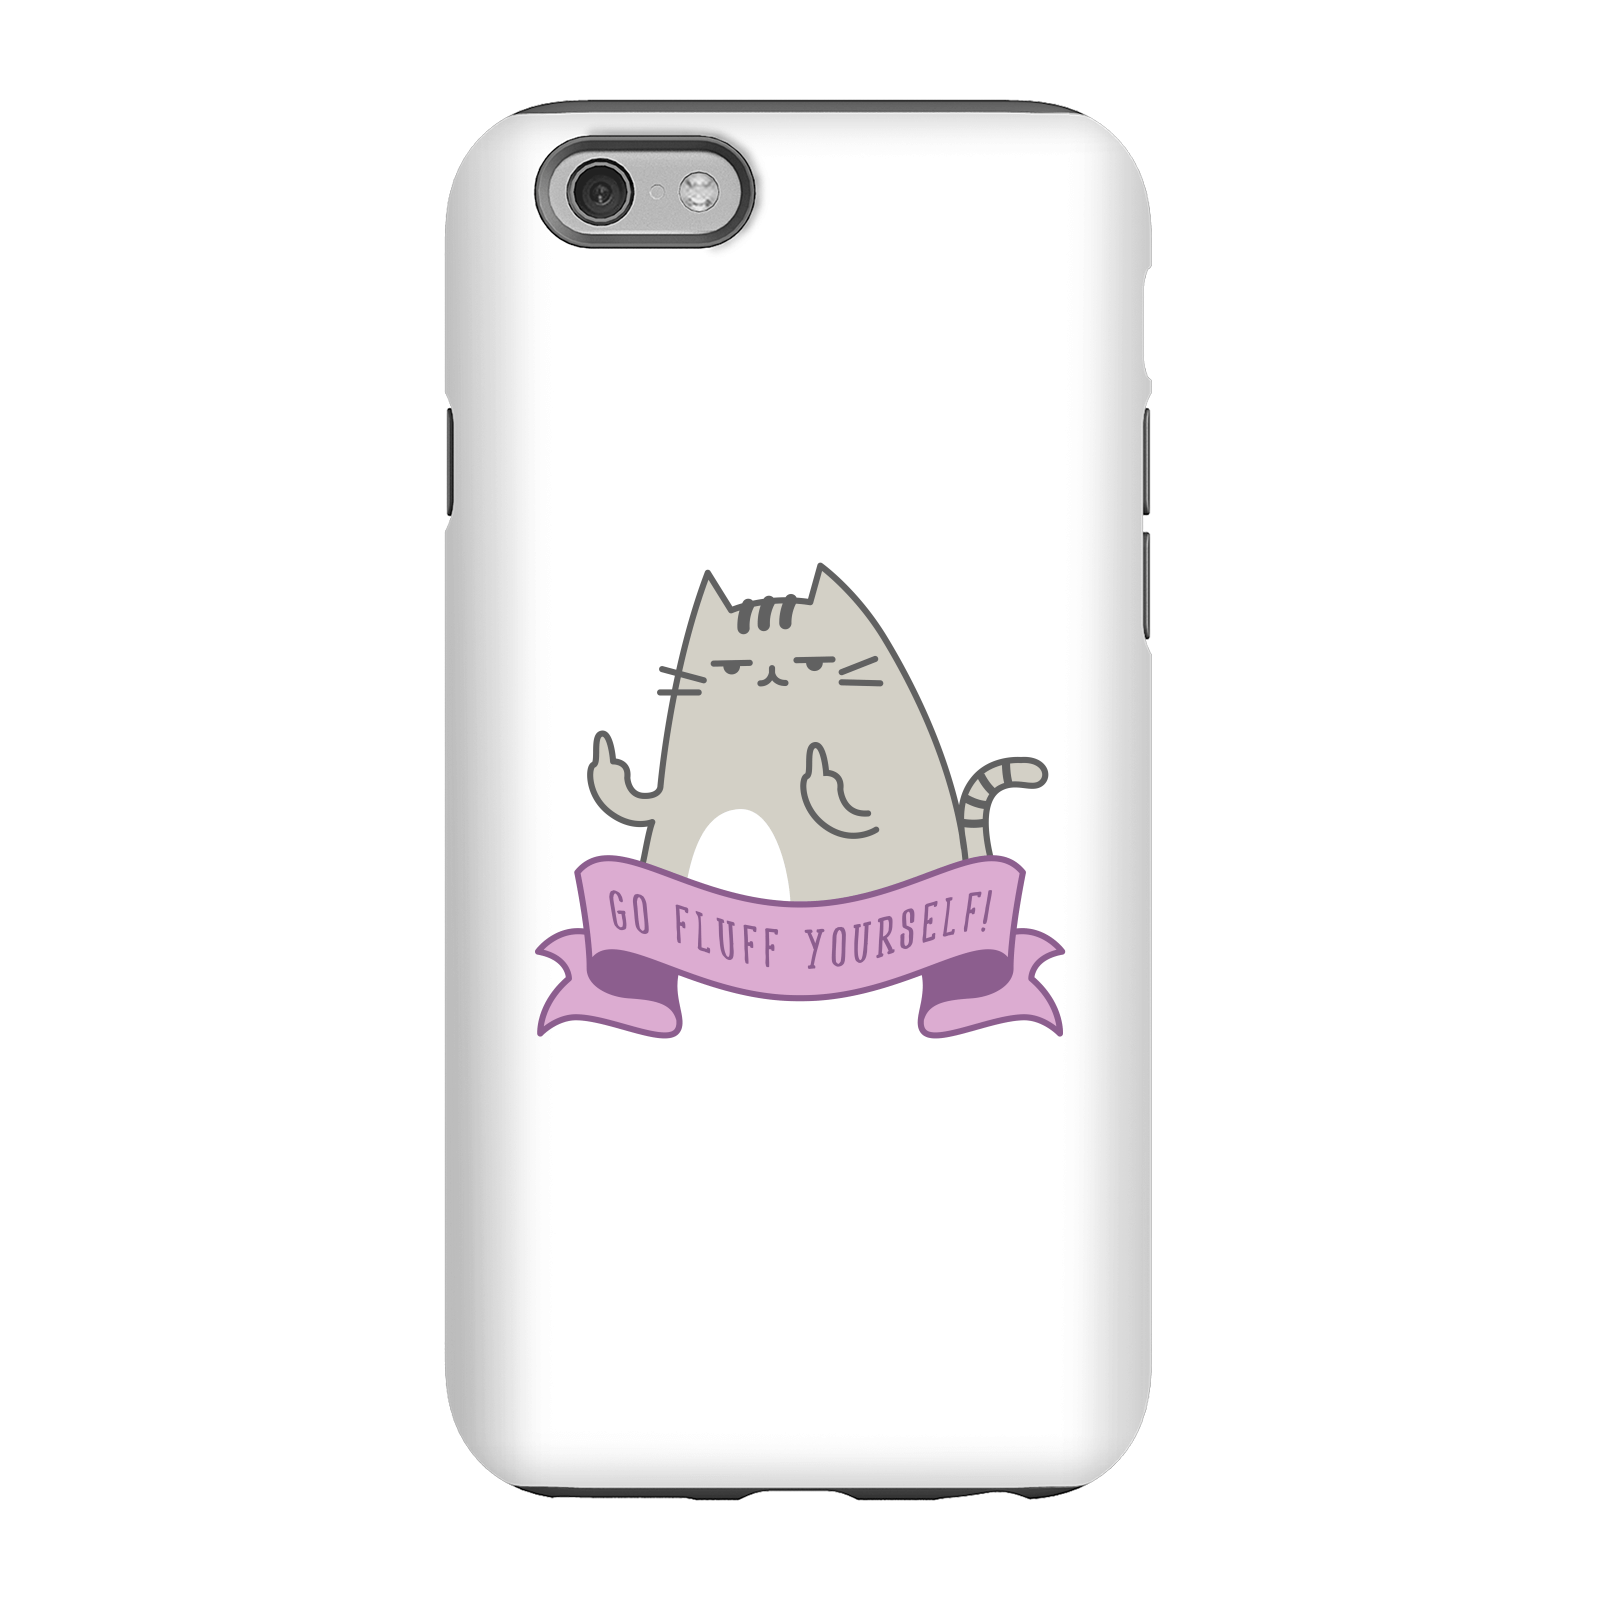 Go Fluff Yourself! Phone Case for iPhone and Android - iPhone 6S - Tough Case - Matte